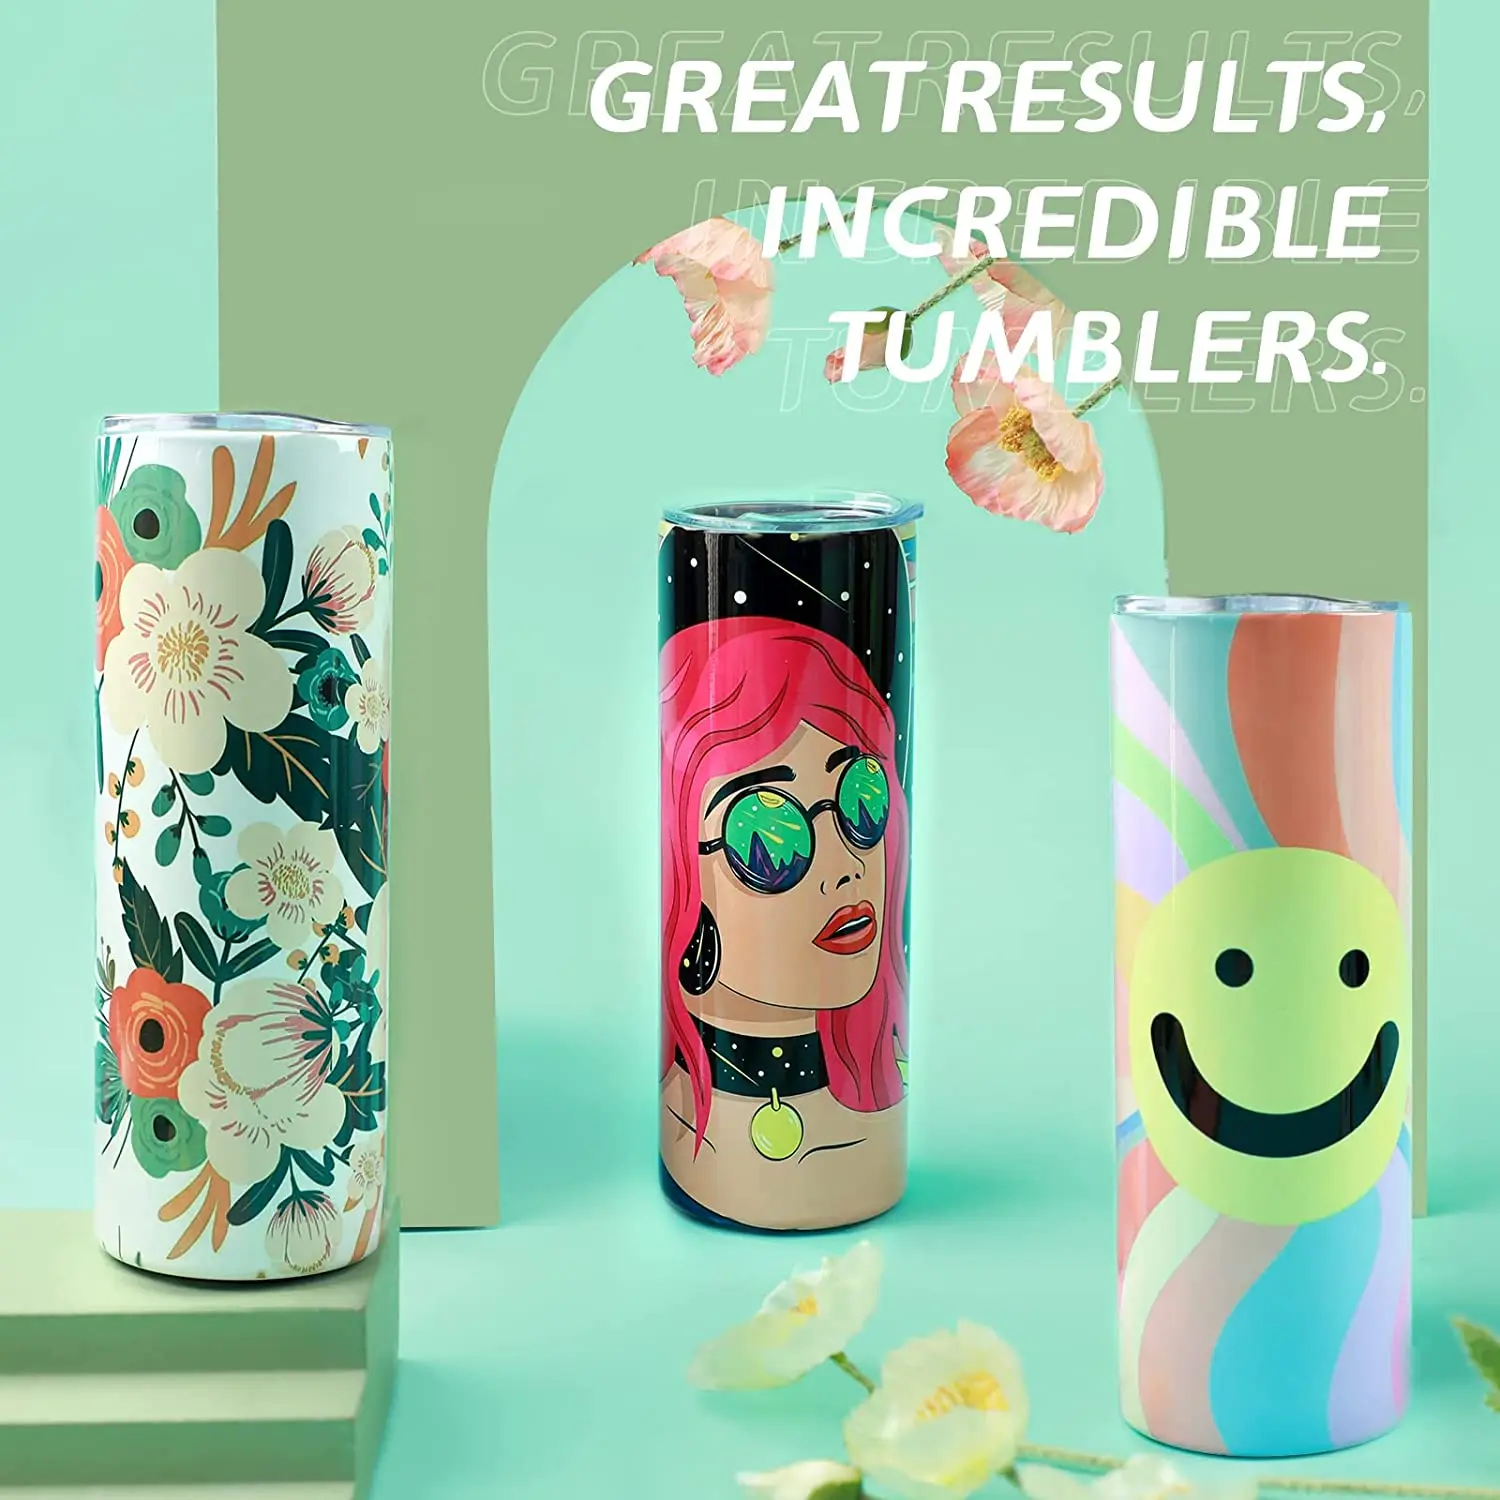 HTVRONT 4 Pack 20oz Straight Sublimation Tumblers Easy to Sublimate Skinny  Tumbler Blanks DIY Mugs Cups with Straw Lid Gifts - AliExpress